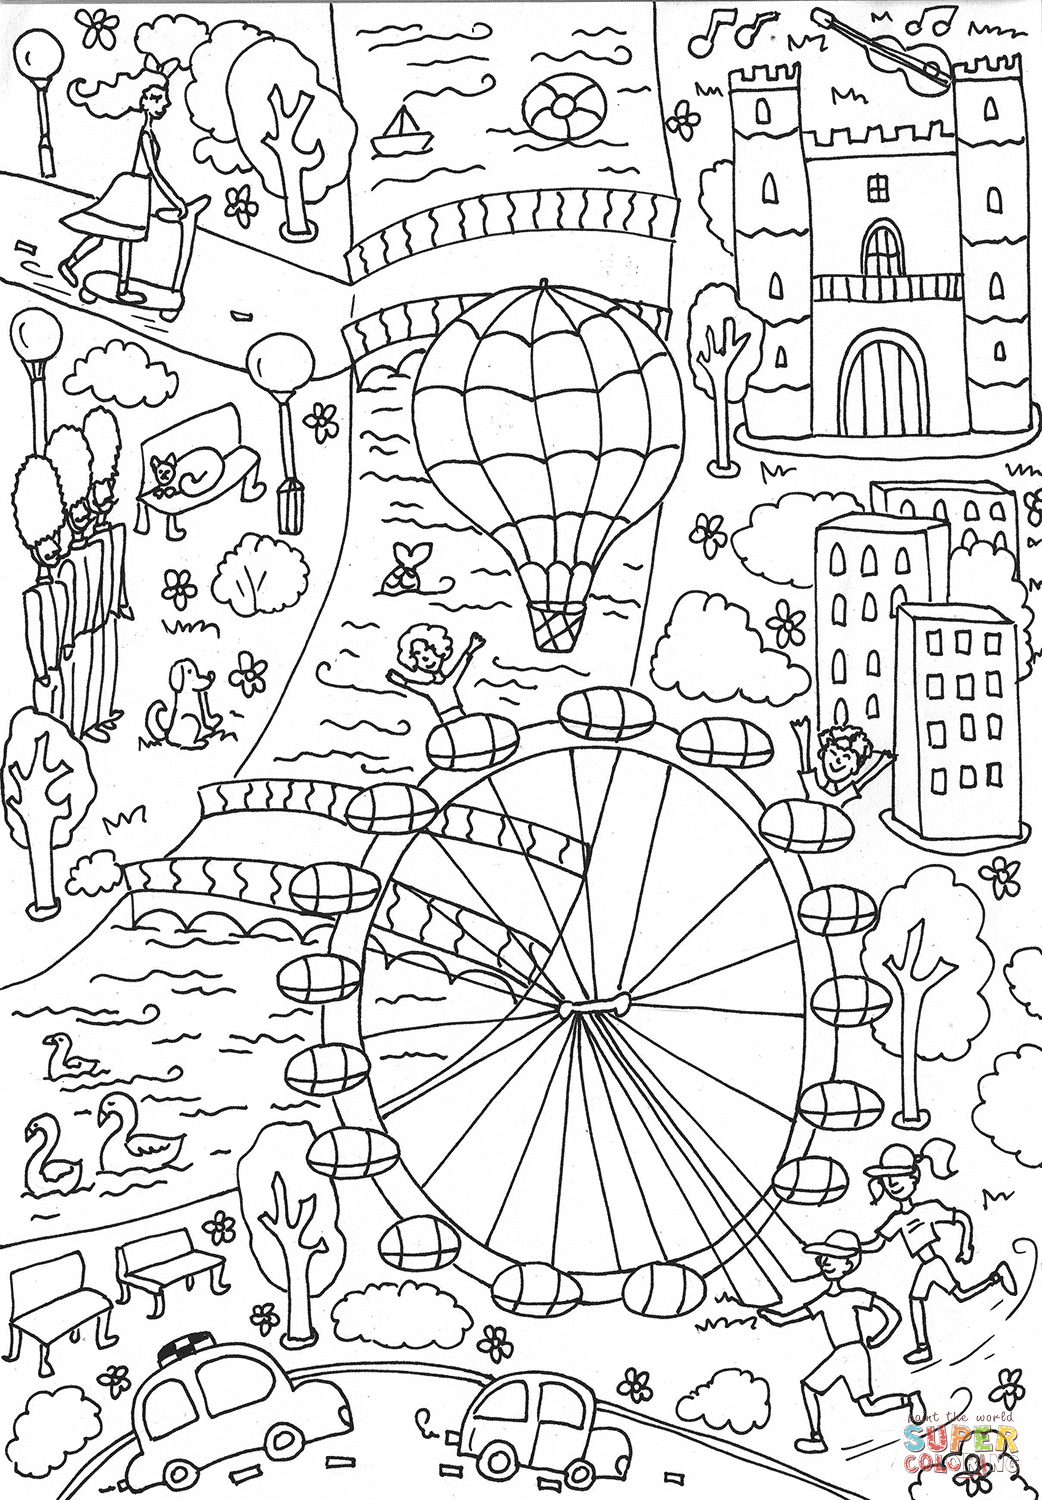 London eye coloring page free printable coloring pages